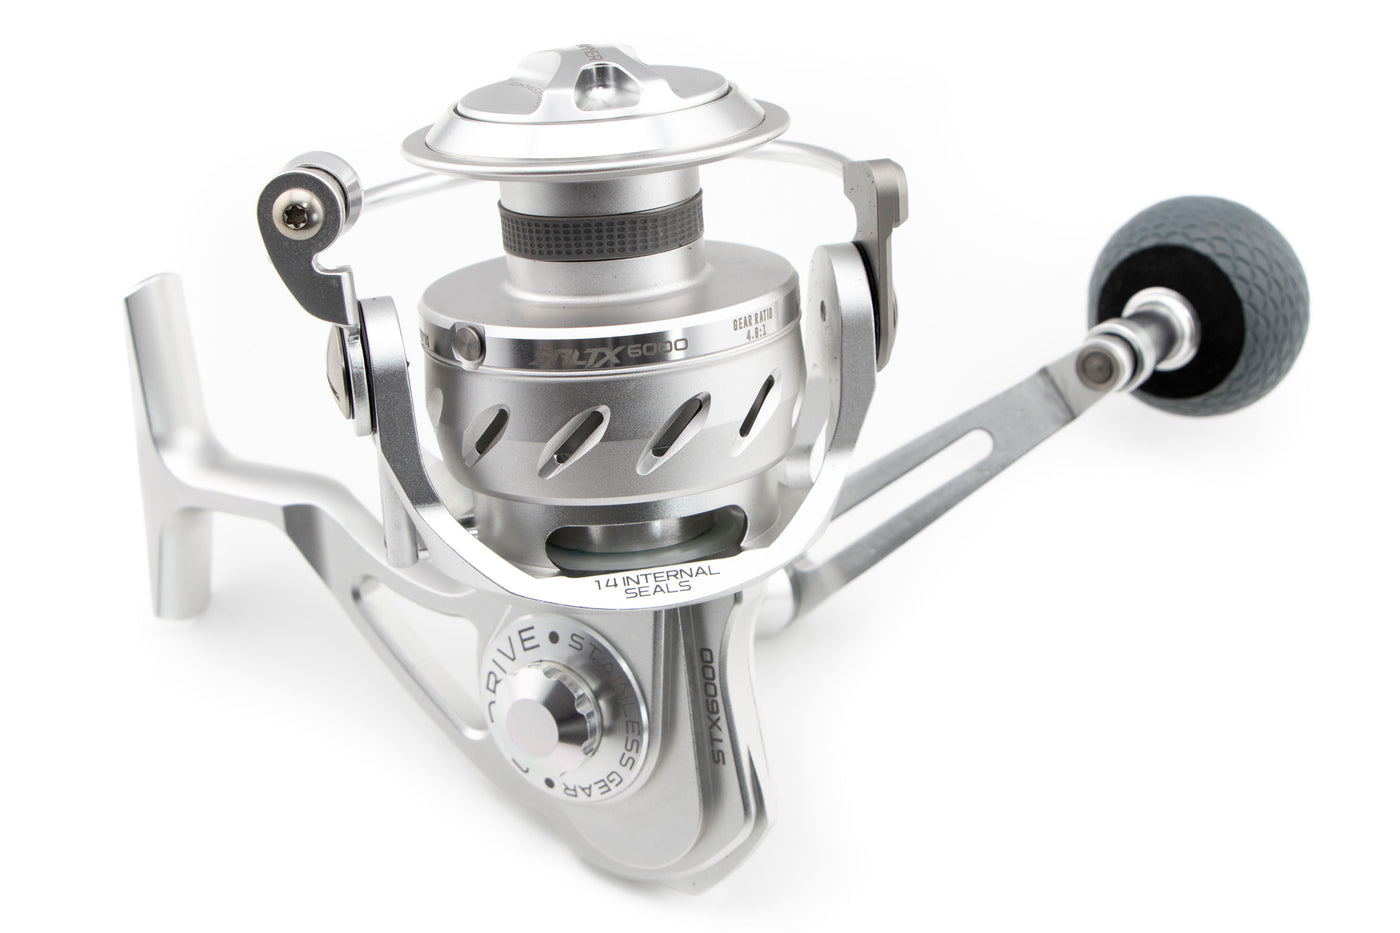 TackleDirect - New Tsunami Salt X Spinning Reels! Waterproof with 14 seals.  4000 and 6000 size. Starting at $375!